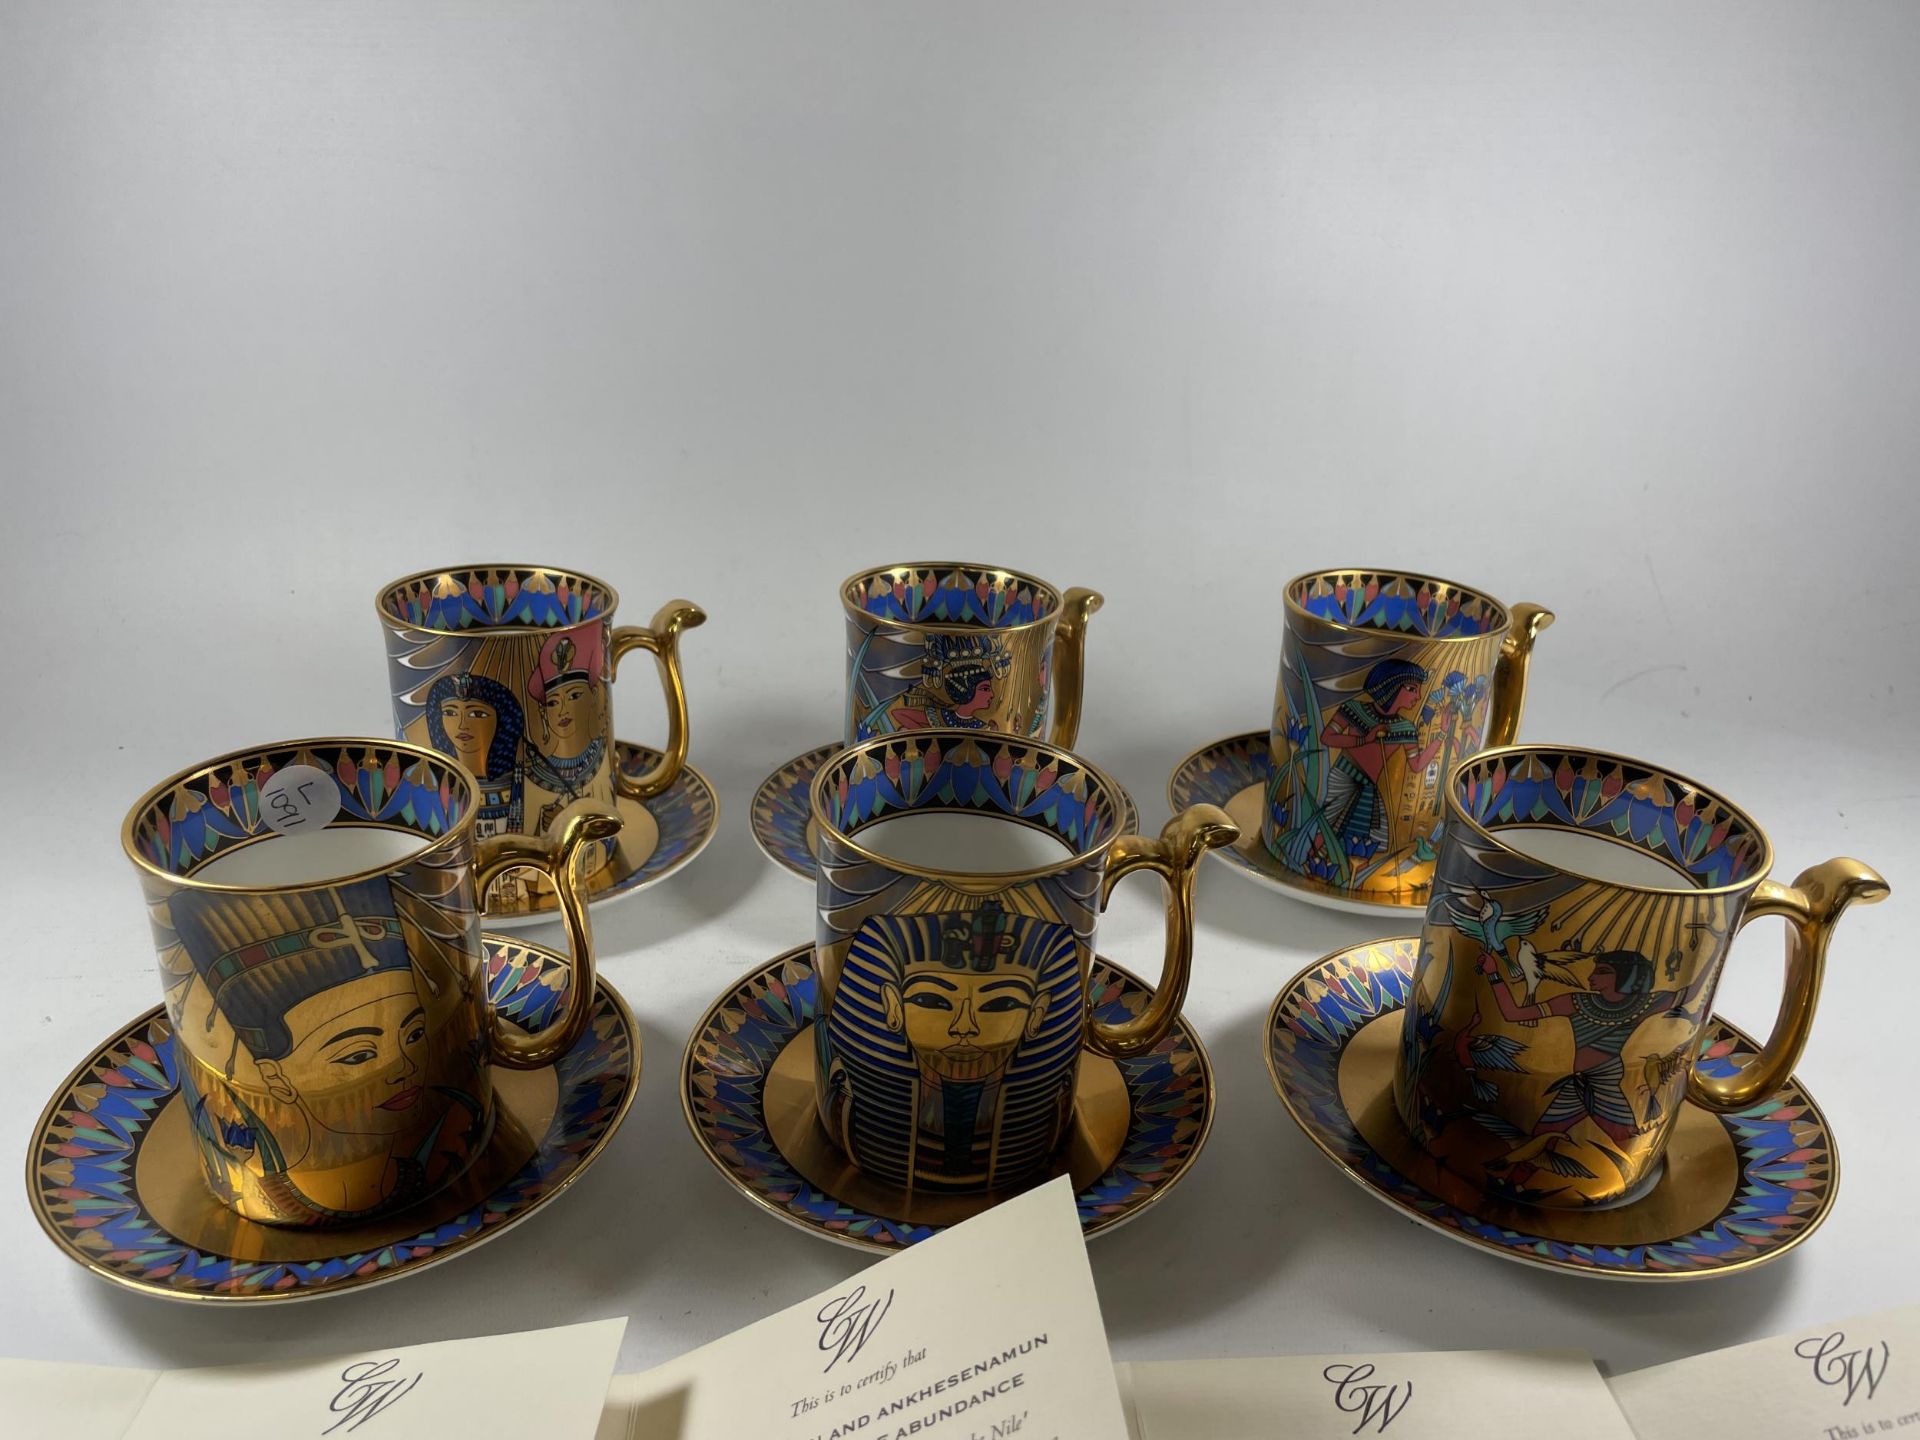 SIX COMPTON AND WOODHOUSE 'WONDERS OF THE NILE' CUPS AND SAUCERS - WITH CERTIFICATES OF AUTHENTICITY - Image 2 of 6